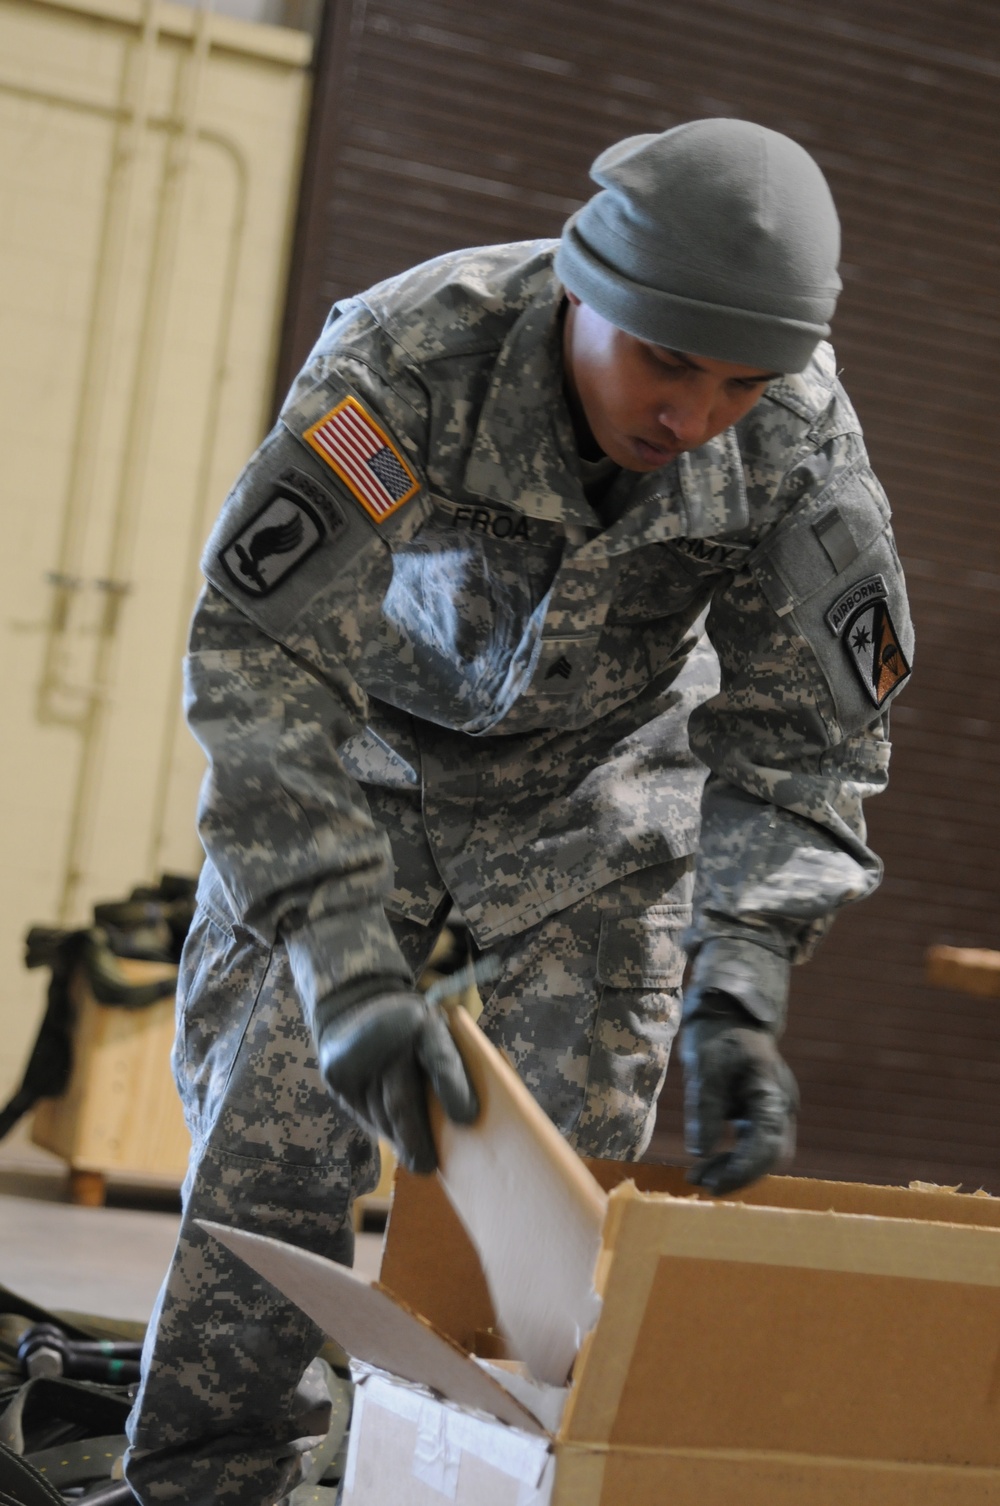 82nd Sus. Bde. supports emergency deployment readiness exercise